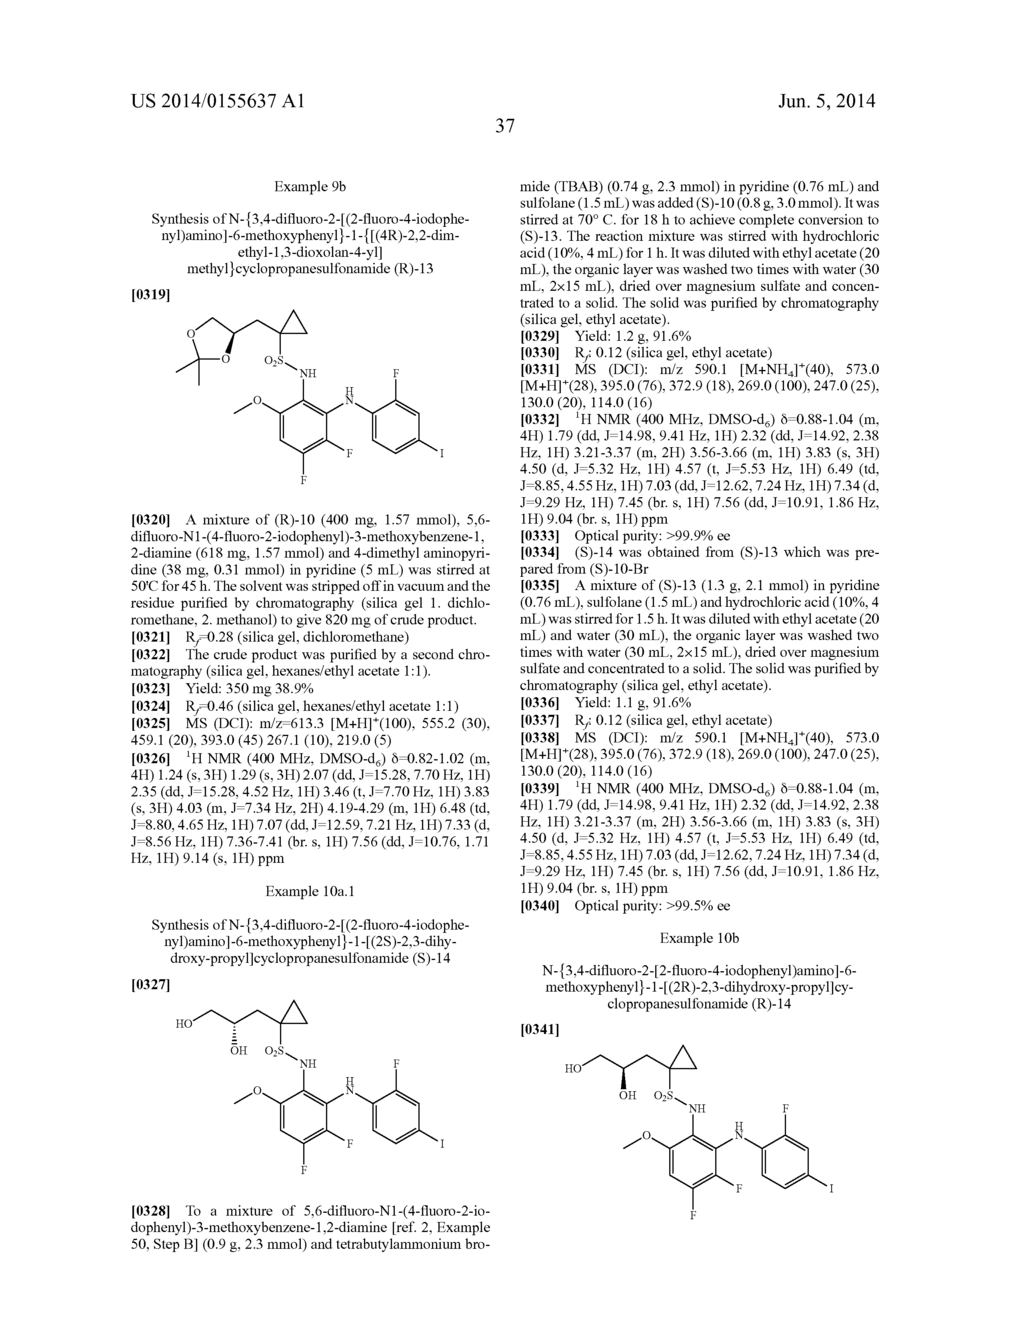 CHIRAL SYNTHESIS OF N--1-[2,3-DIHYDROXY-PROPYL]CYCLOPROPANESULFONAMIDES - diagram, schematic, and image 38